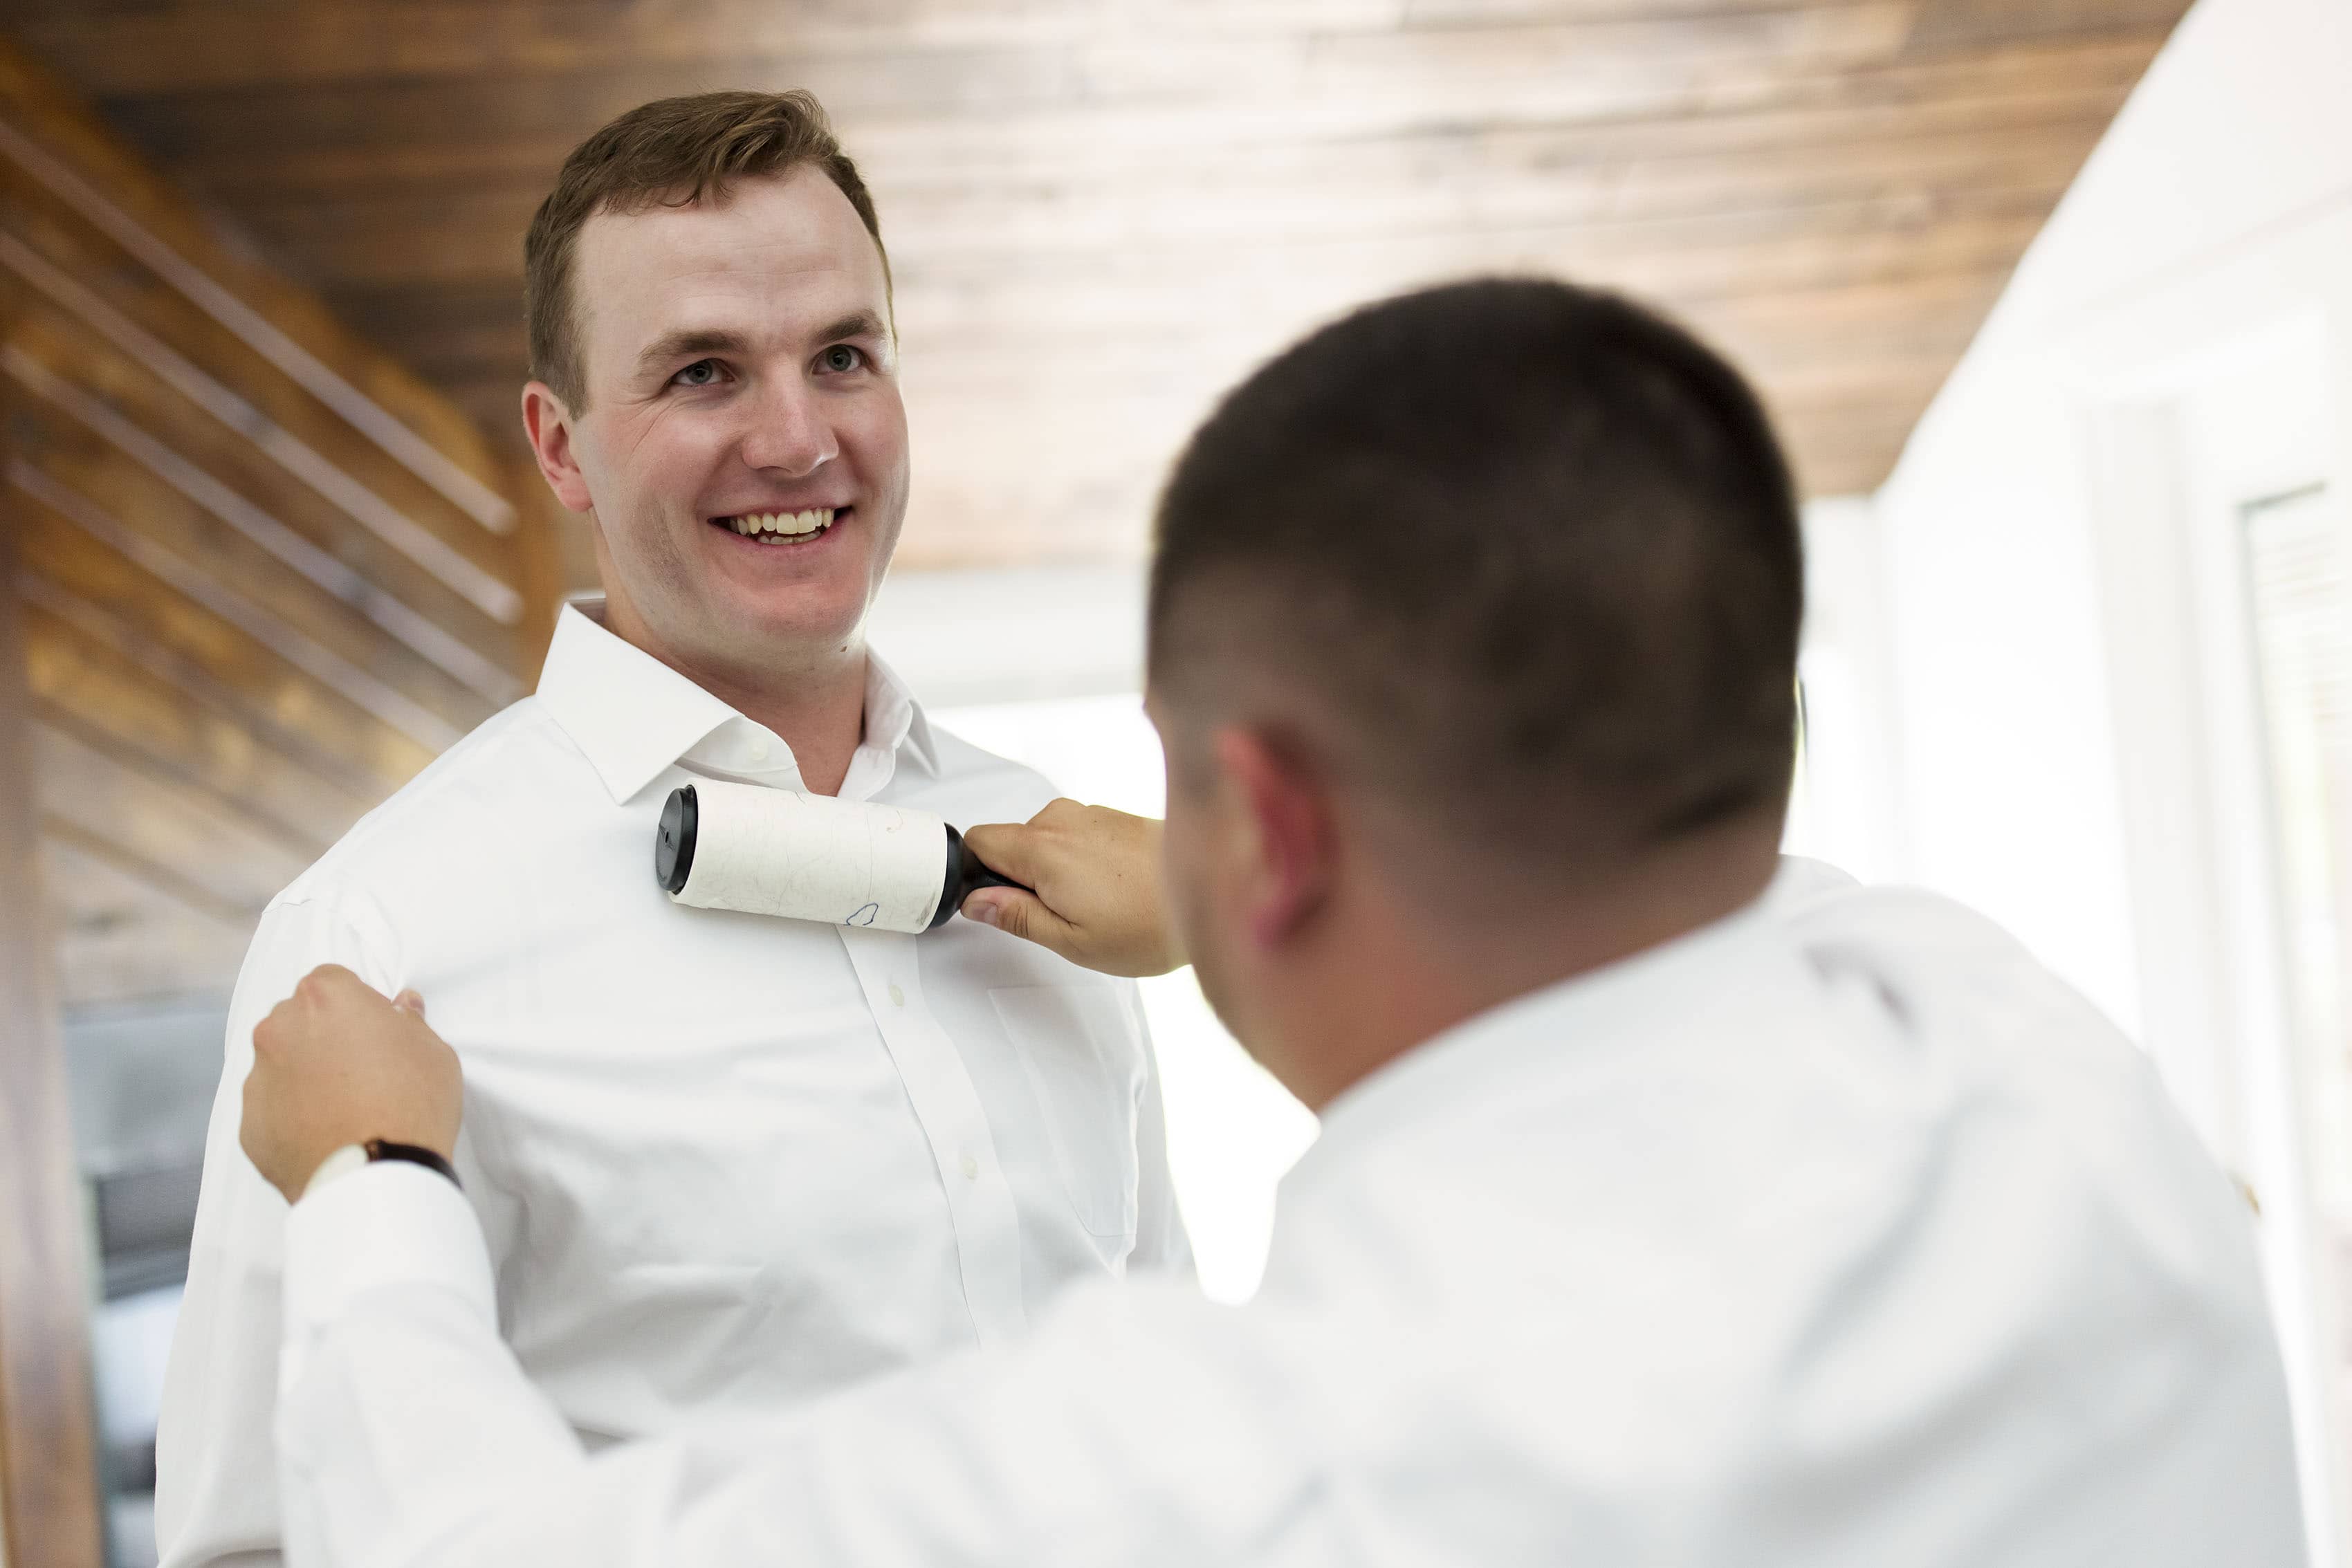 The groom has his lint on his shirt removed by a friend